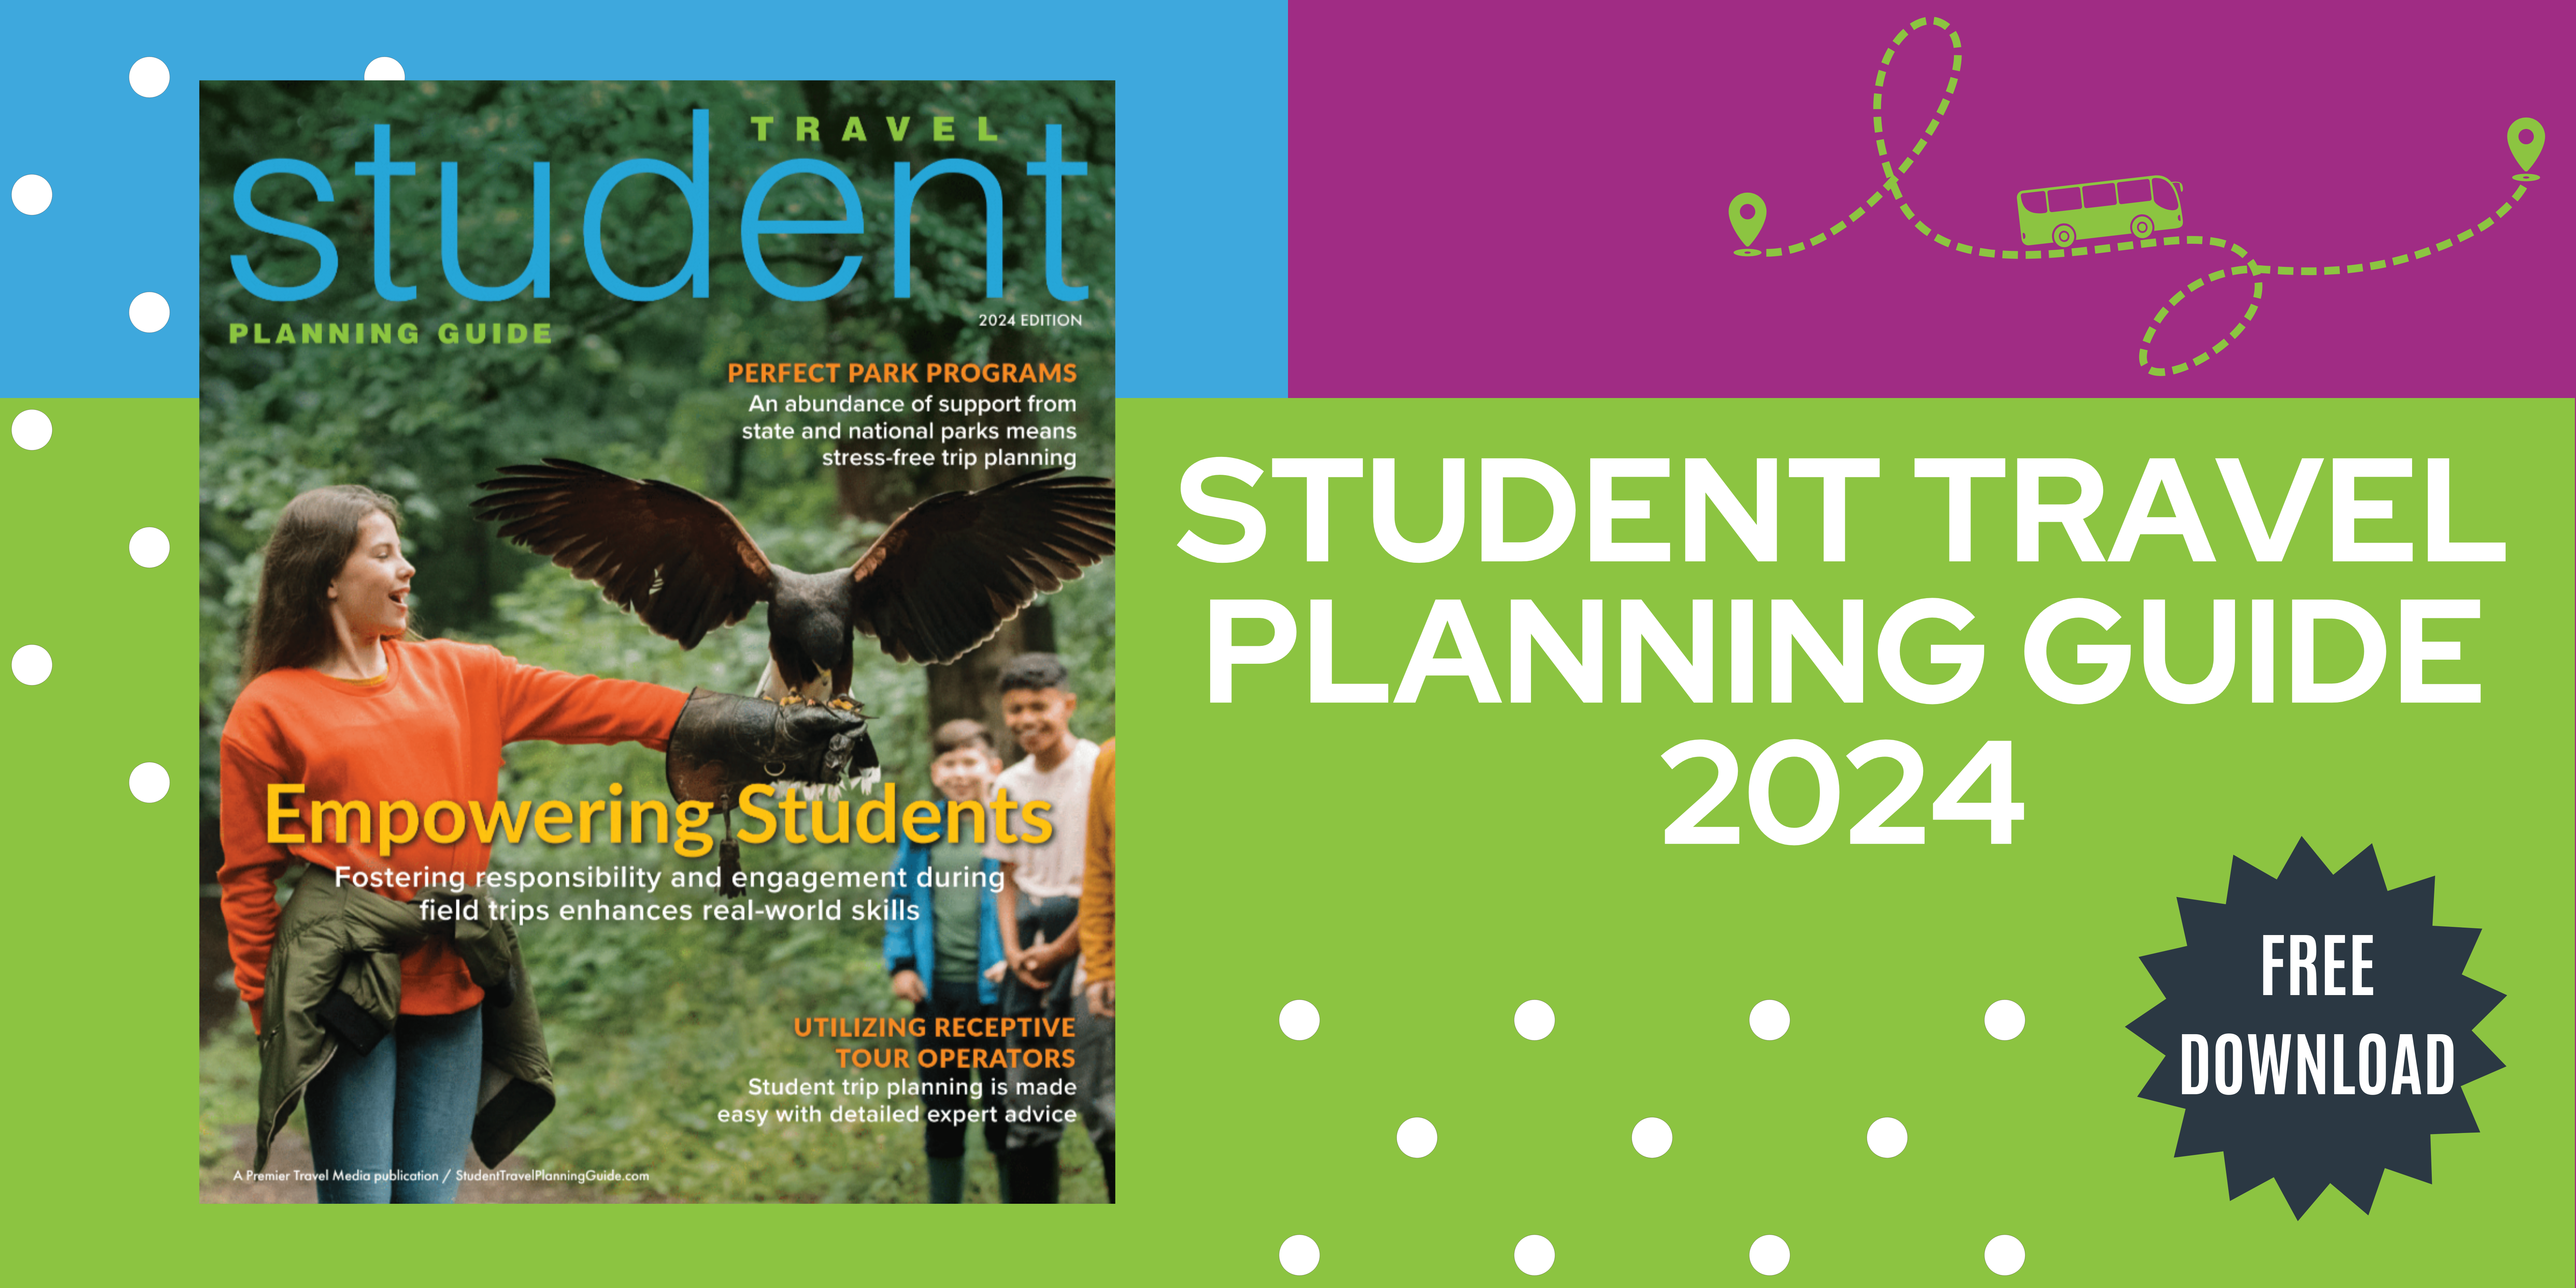 The Ultimate Resource for Student Travel: Introducing Student Travel Planning Guide 2024